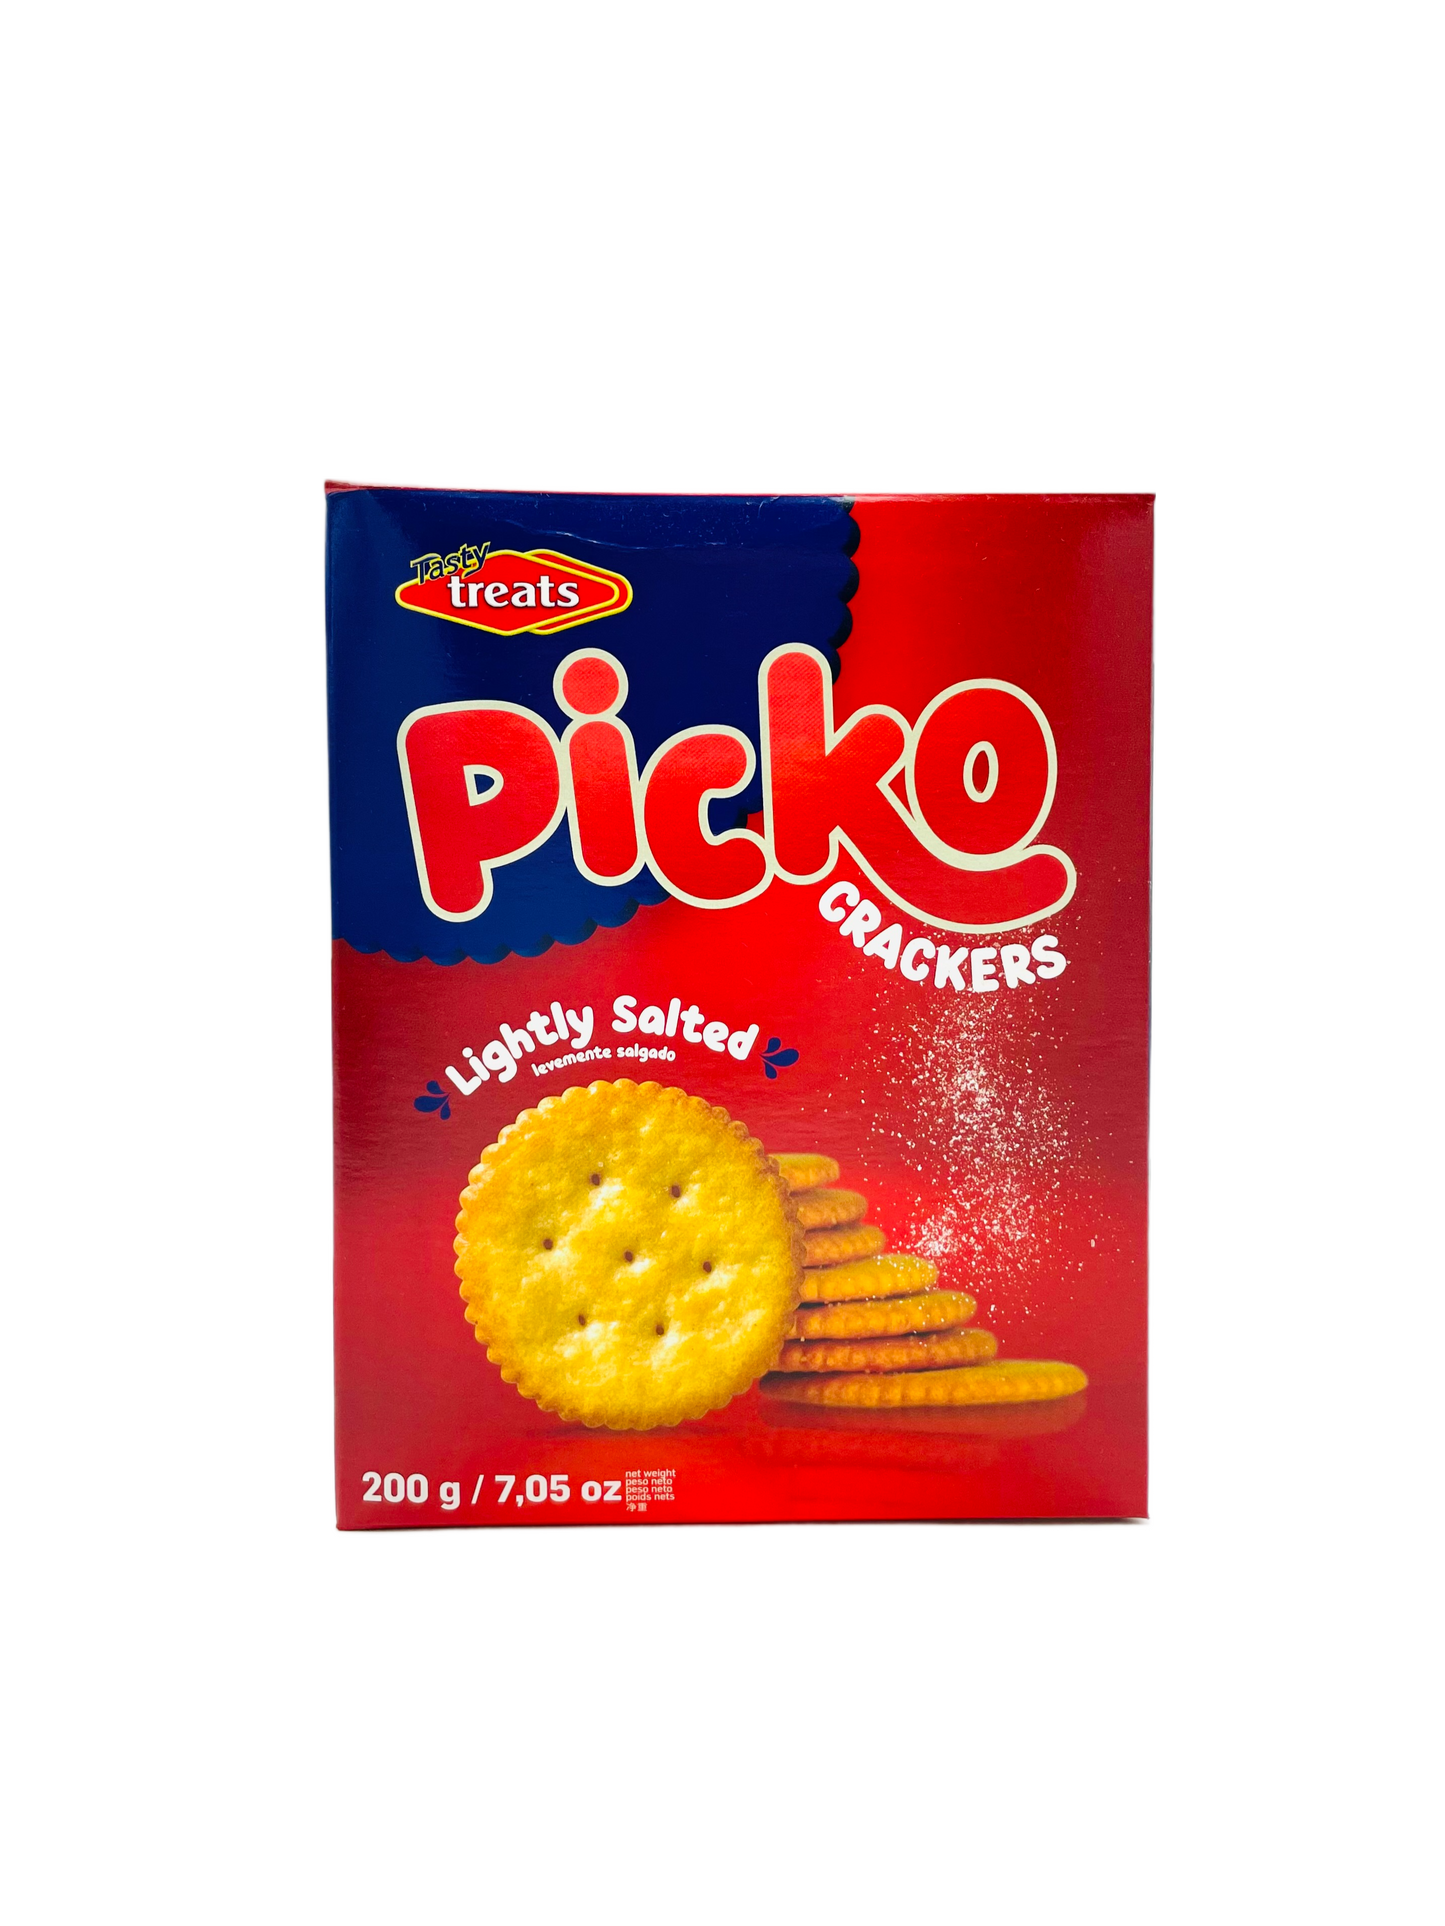 Tasty Treats Picko Lightly Salted Crackers 200g